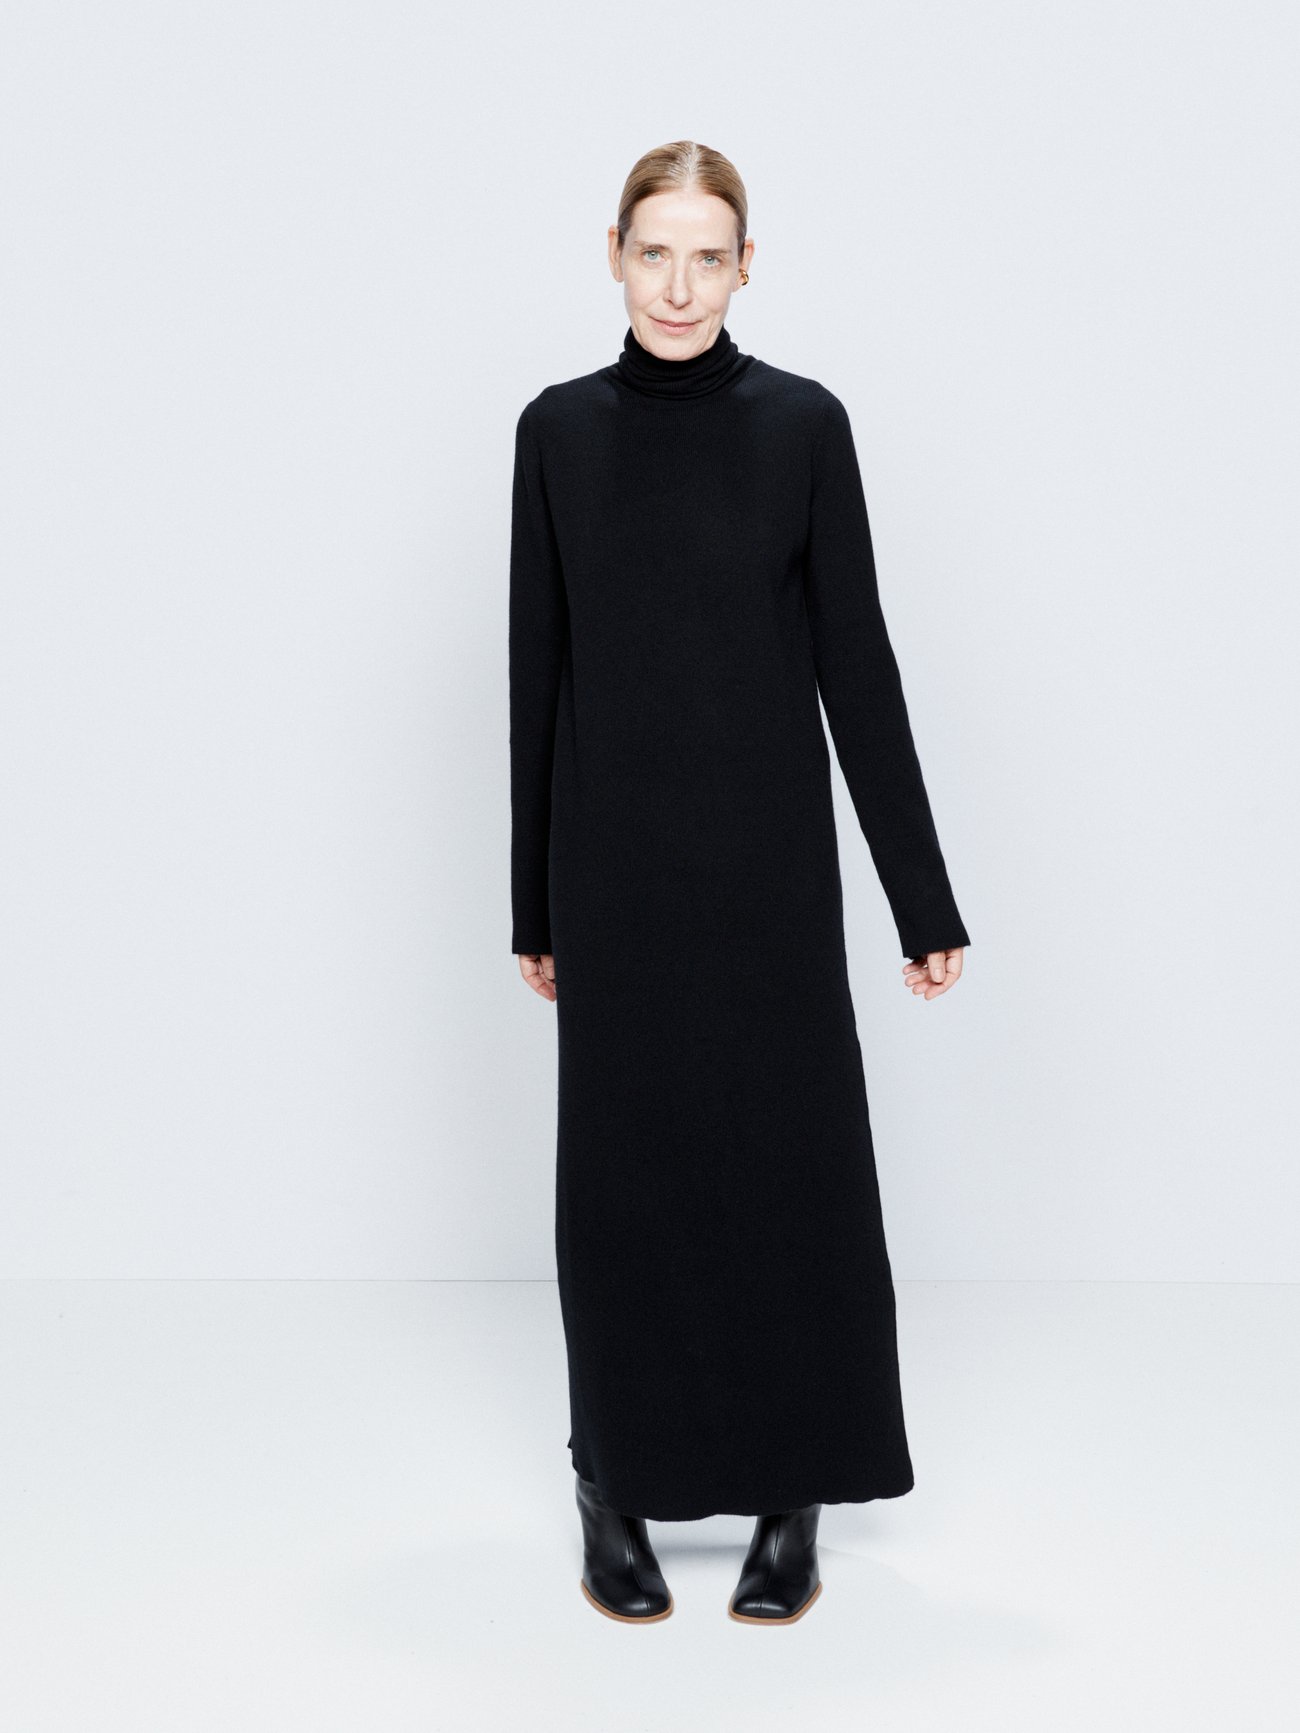 Seriously, Zara's New-In Section Is So Good Right Now  Knit dress, Ribbed  knit dress, High fashion street style